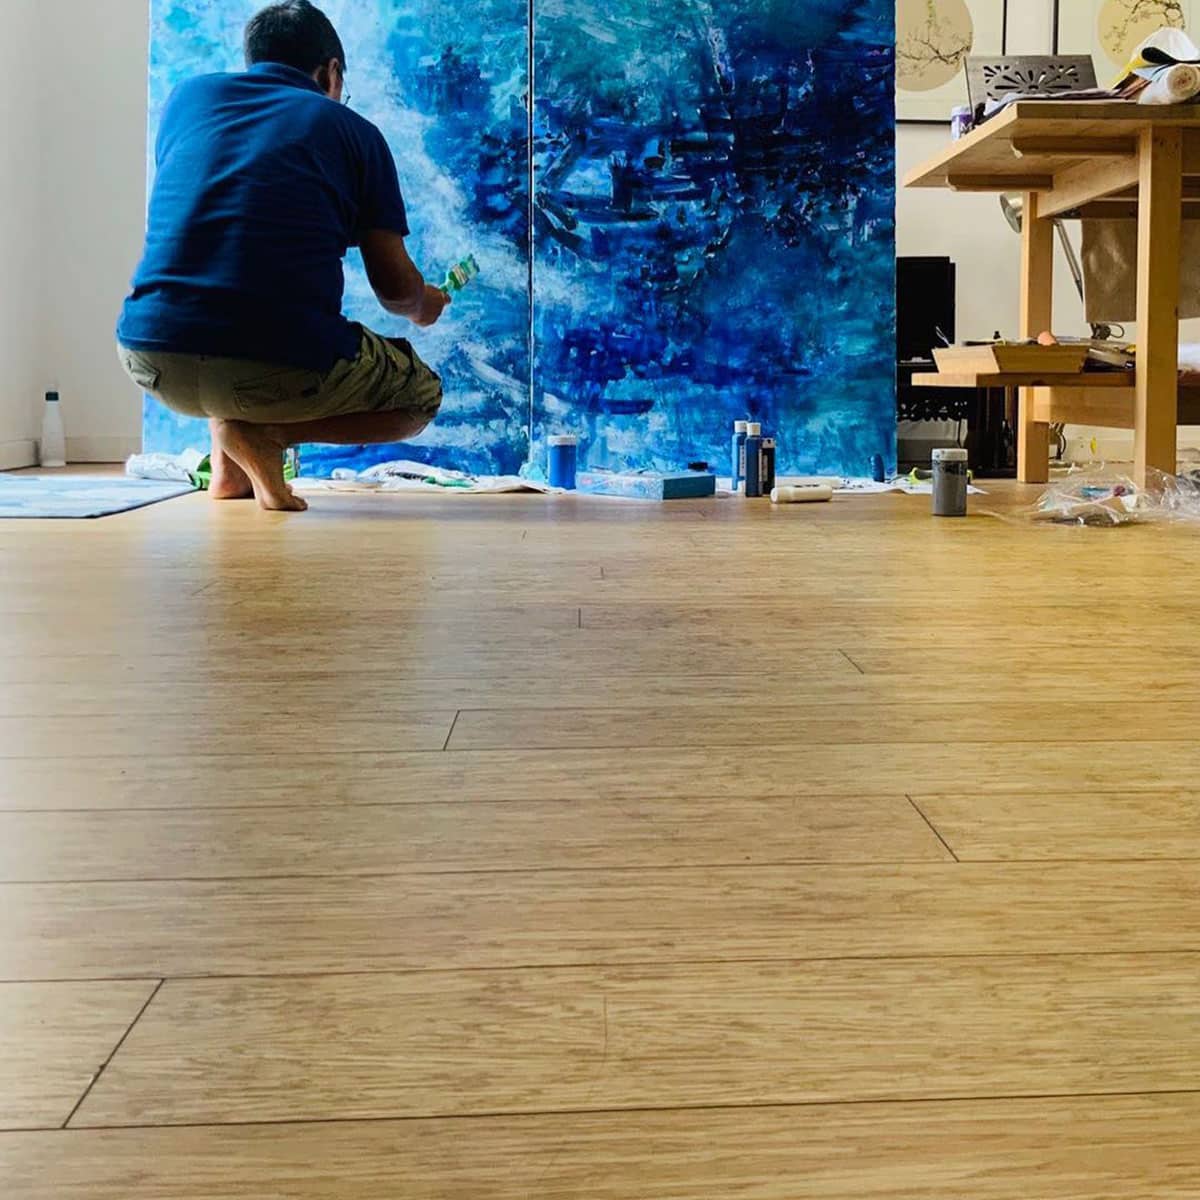 Western and asian art. Chinese artist Yan Bei painting in his studio